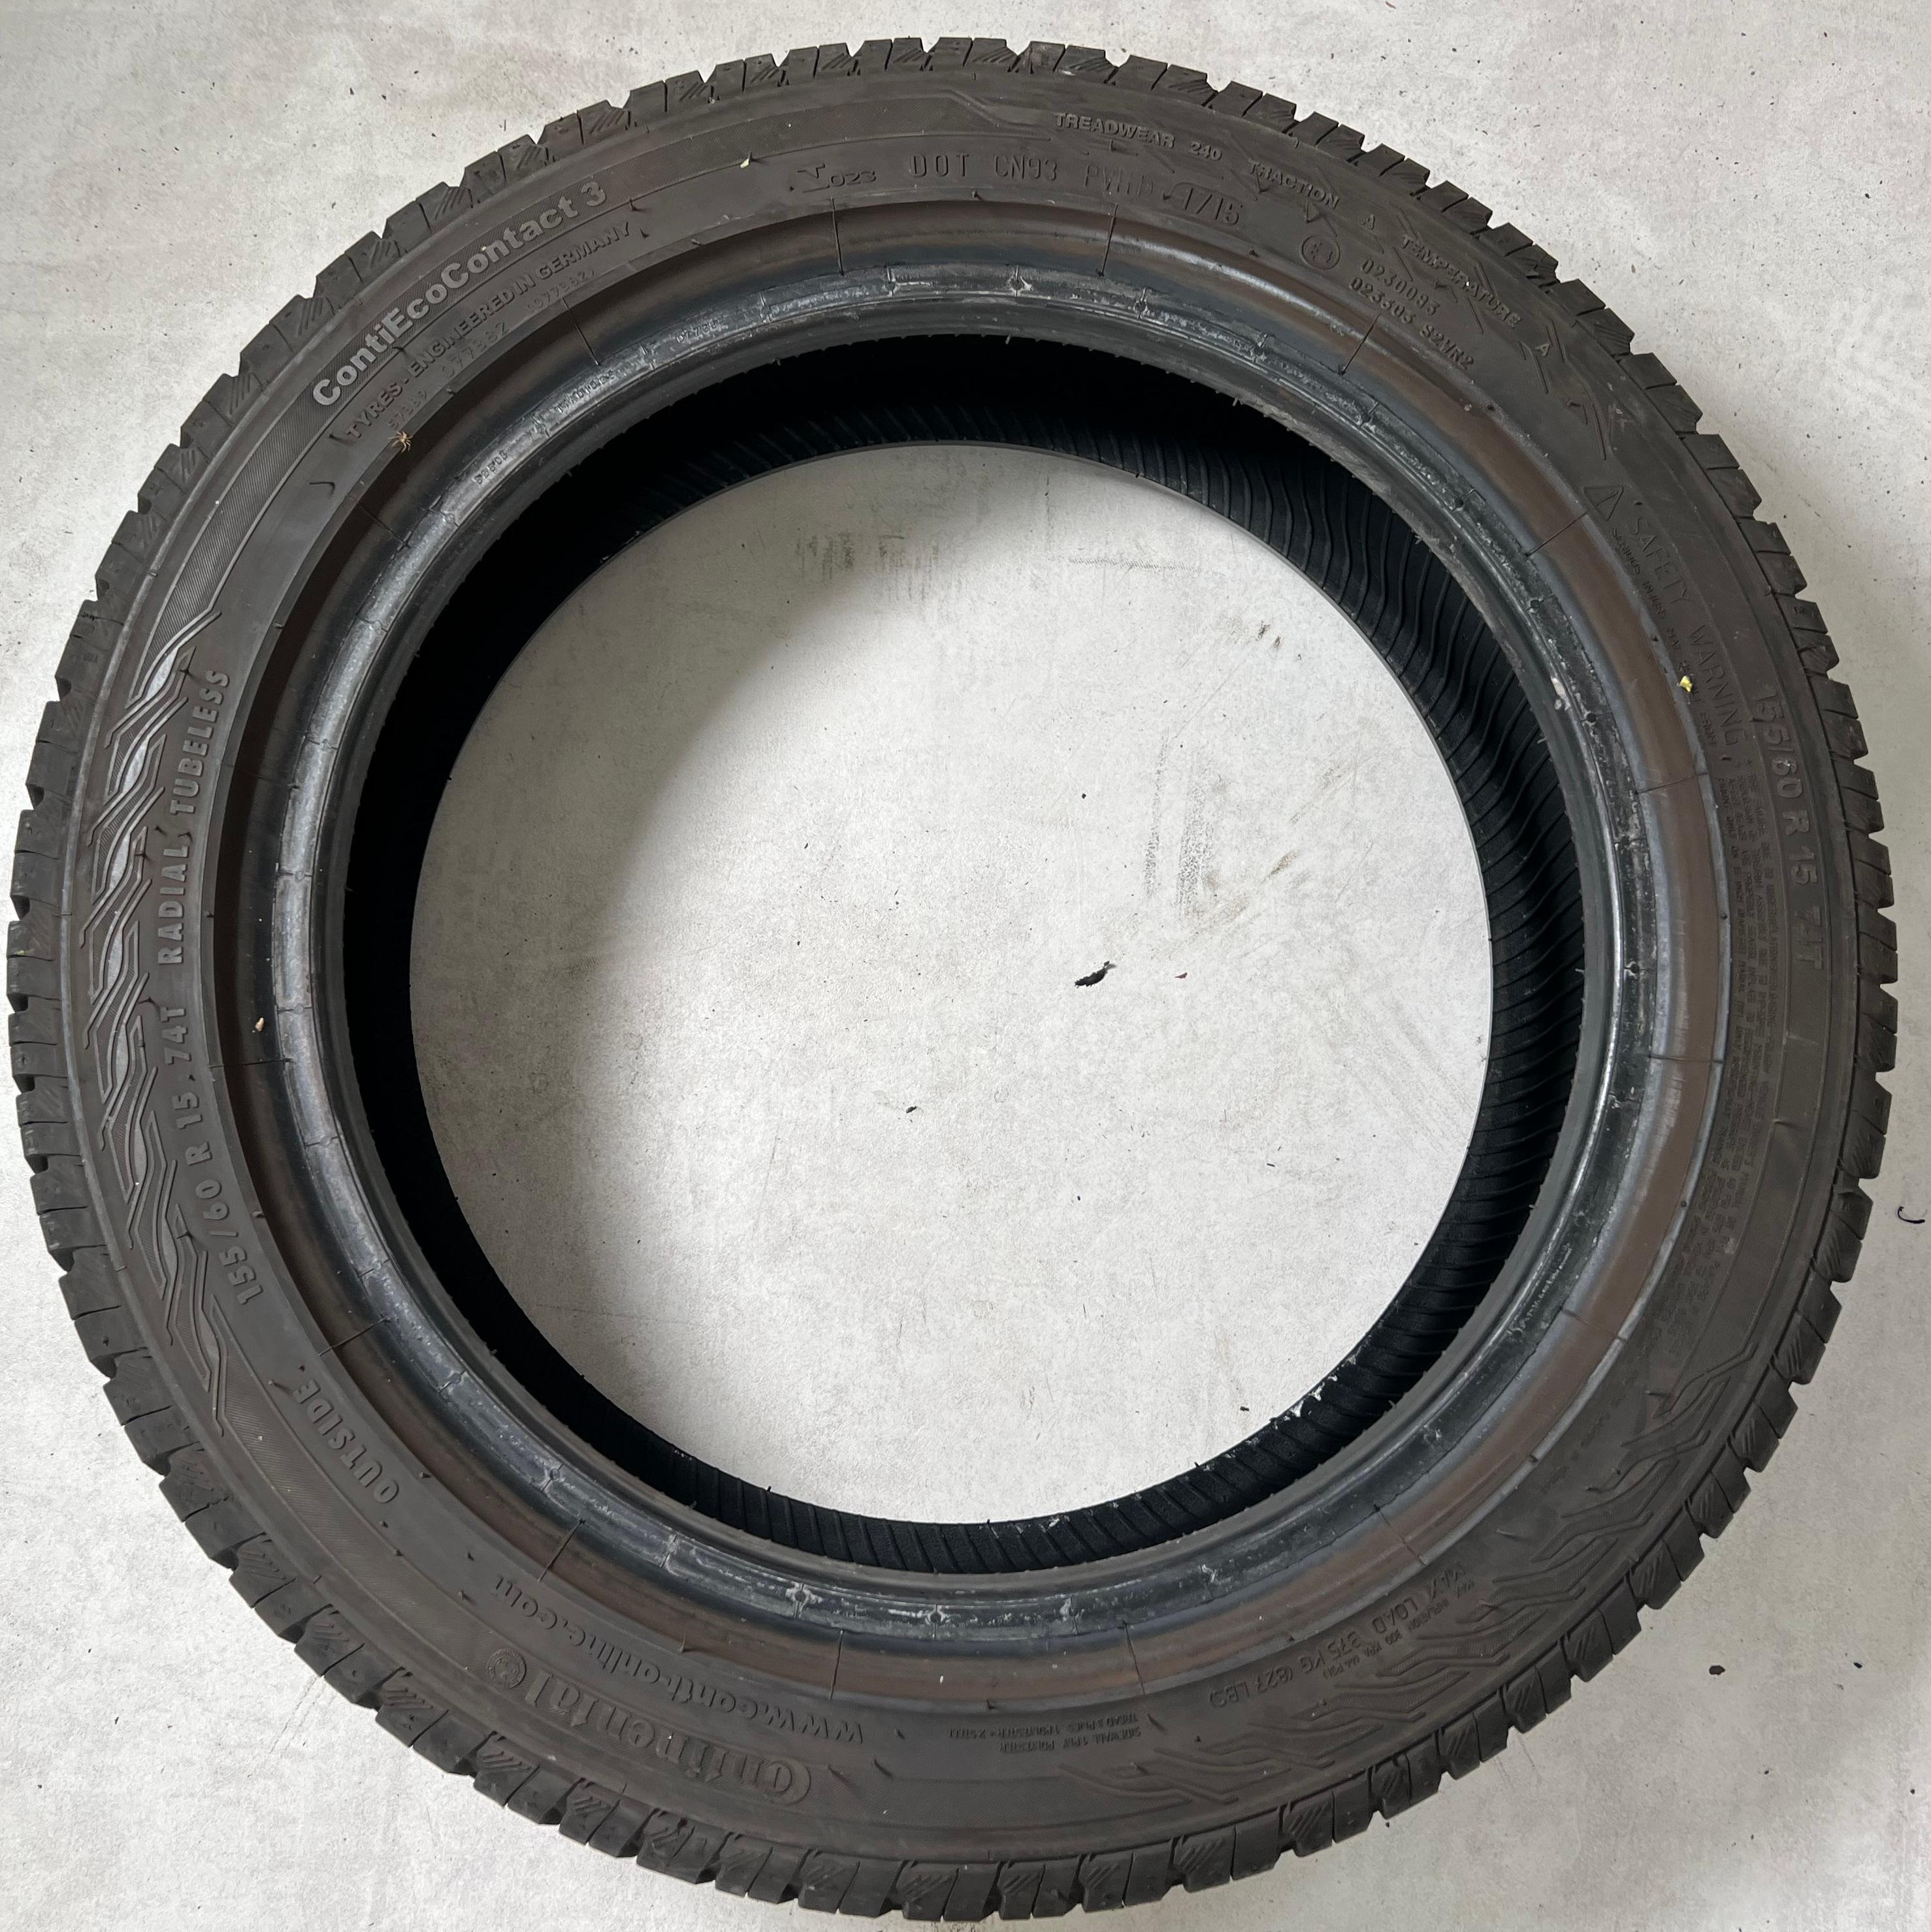 1 x 155/60R15 74T Sommerreifen Continental Eco Contact 3 6-6,5mm 2015